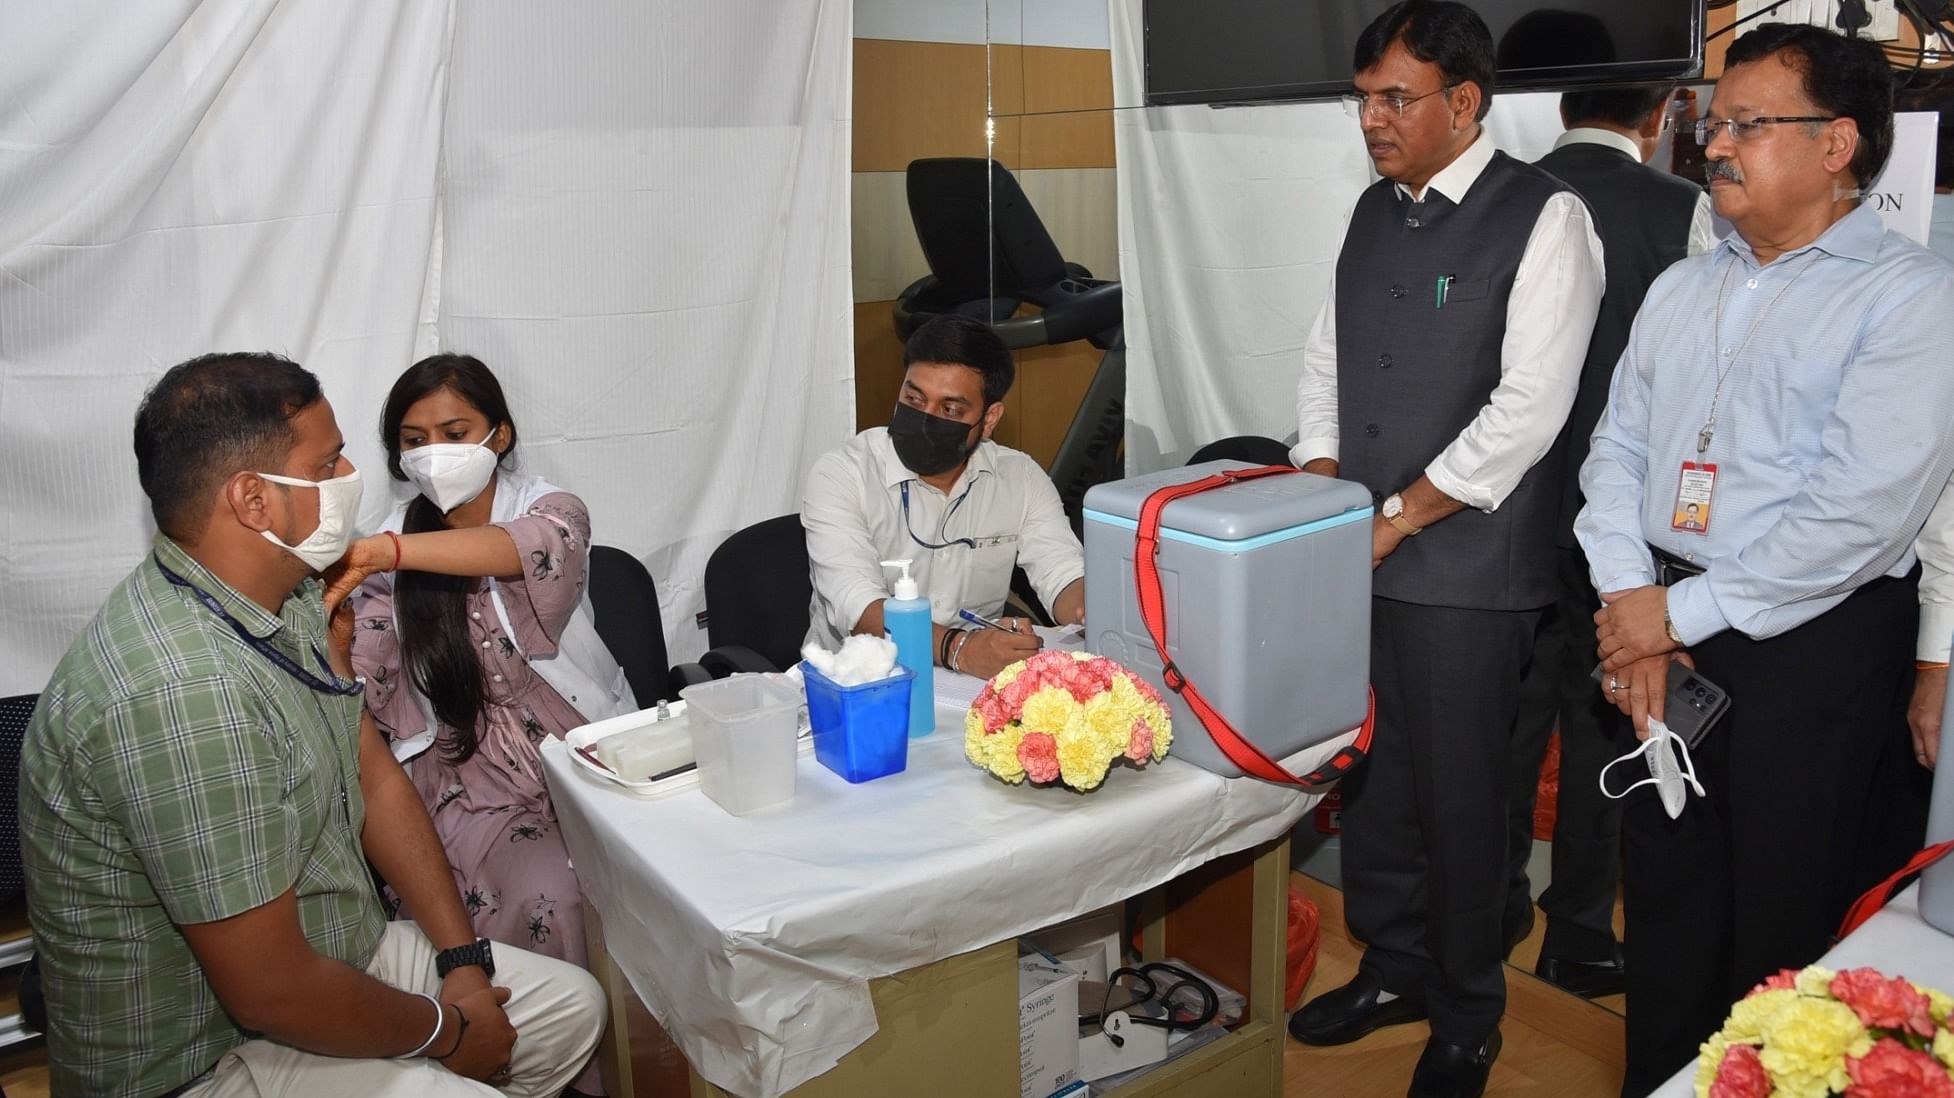 Union Minister for Health & Family Welfare, Chemicals and Fertilizers Mansukh Mandaviya launches the nationwide 'COVID Vaccination Amrit Mahotsava' at Government COVID Vaccination Centres (CVCs) for next 75 days, at Nirman Bhawan in New Delhi on Friday. Credit:IANS Photo